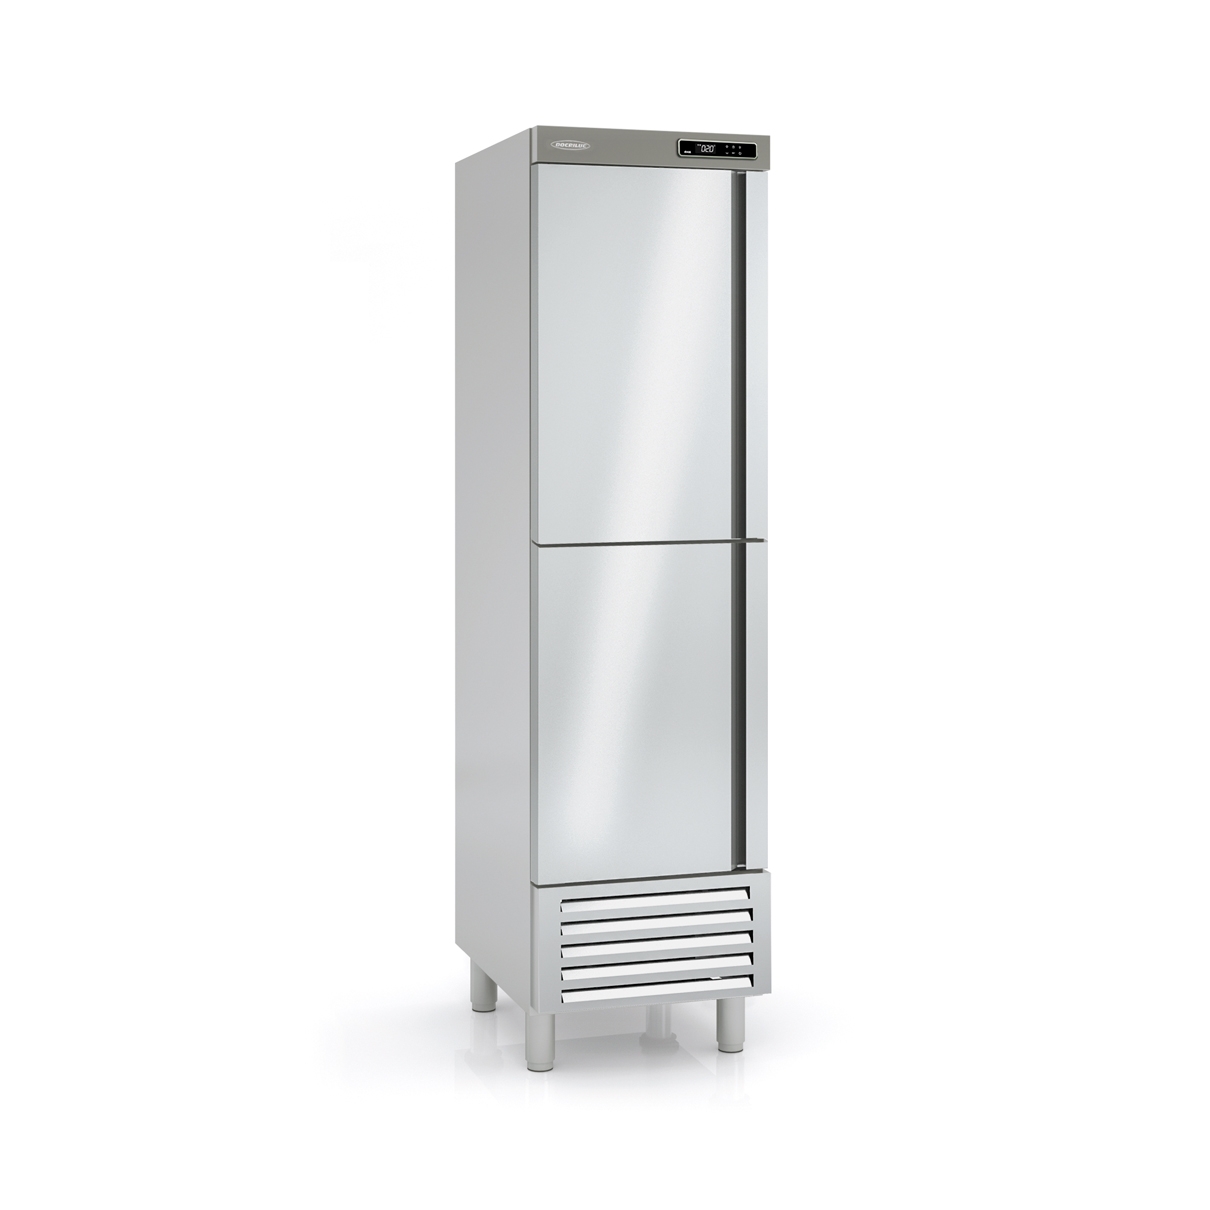 Snack Refrigerated Cabinet AR-55-2